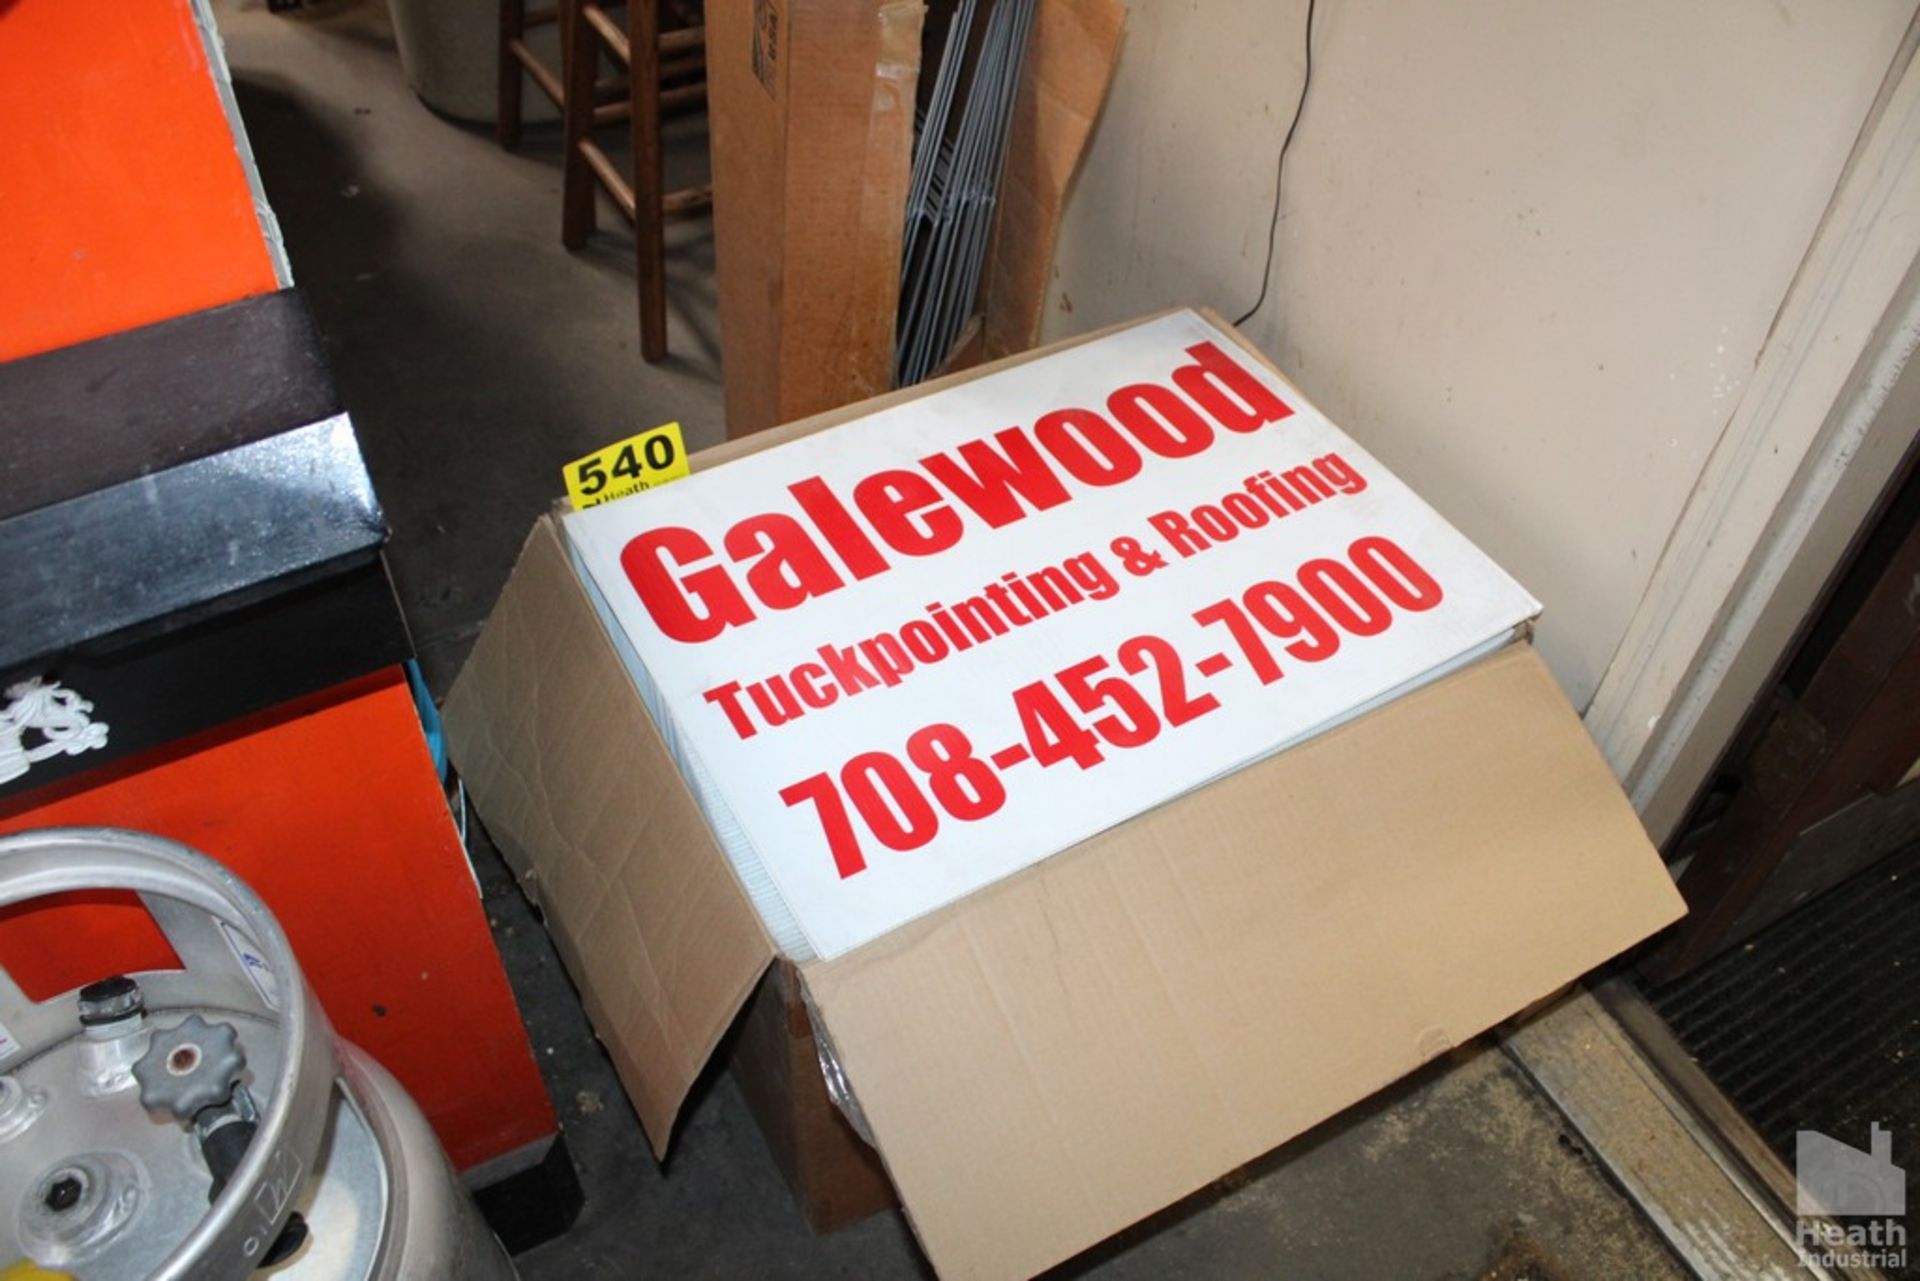 LARGE QUANTITY OF GALEWOOD TUCKPOINTING AND ROOFING SIGNS